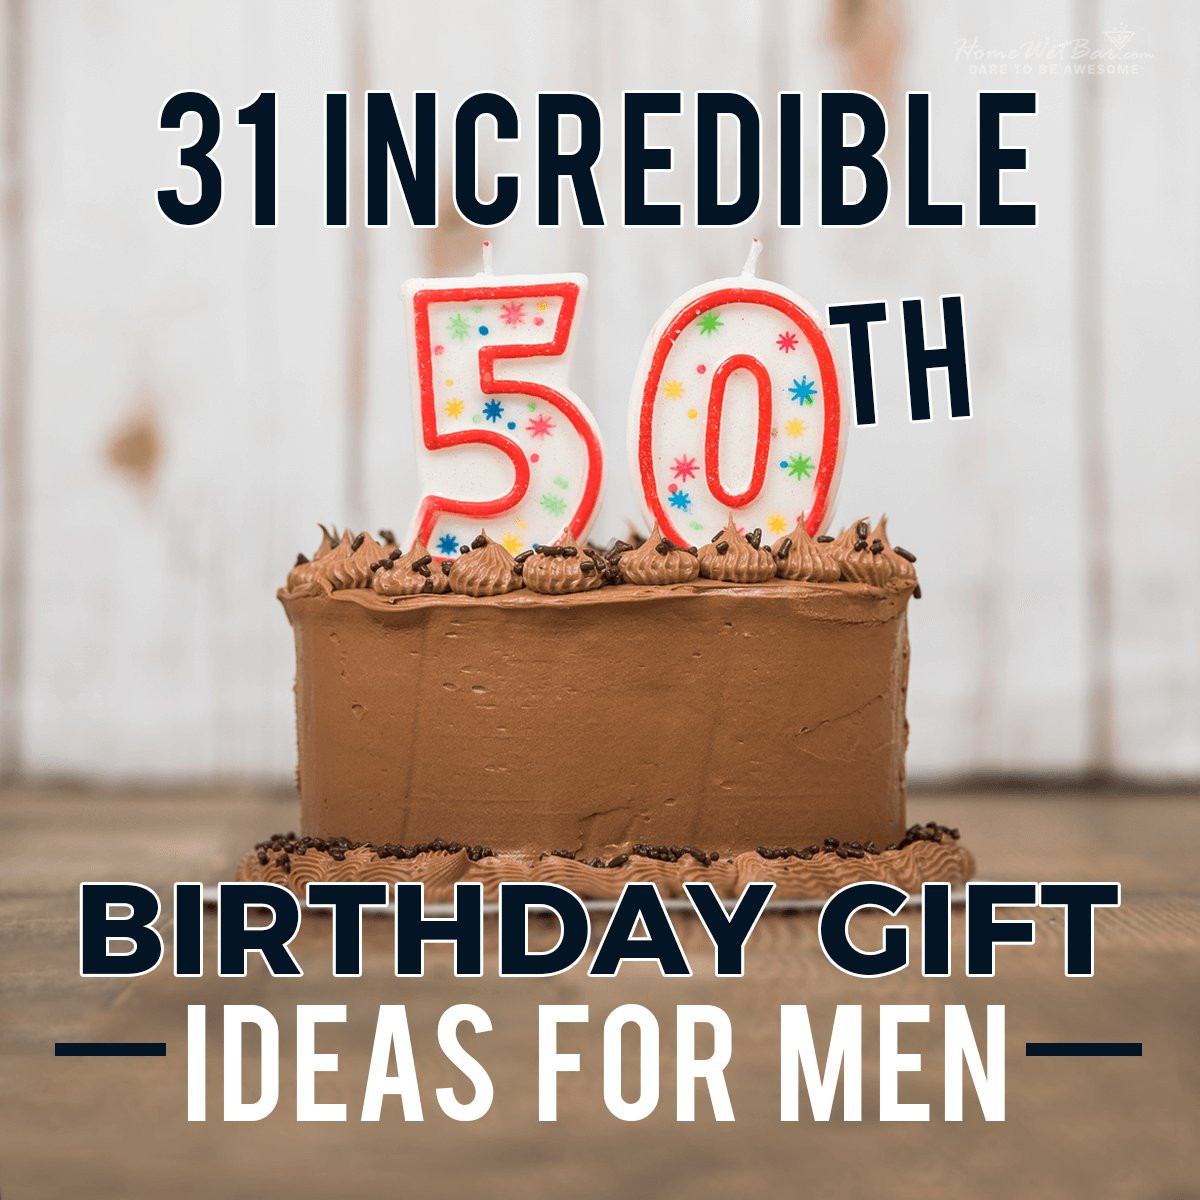 Birthday Gift Ideas For 50 Year Old Man
 31 Incredible 50th Birthday Gift Ideas for Men